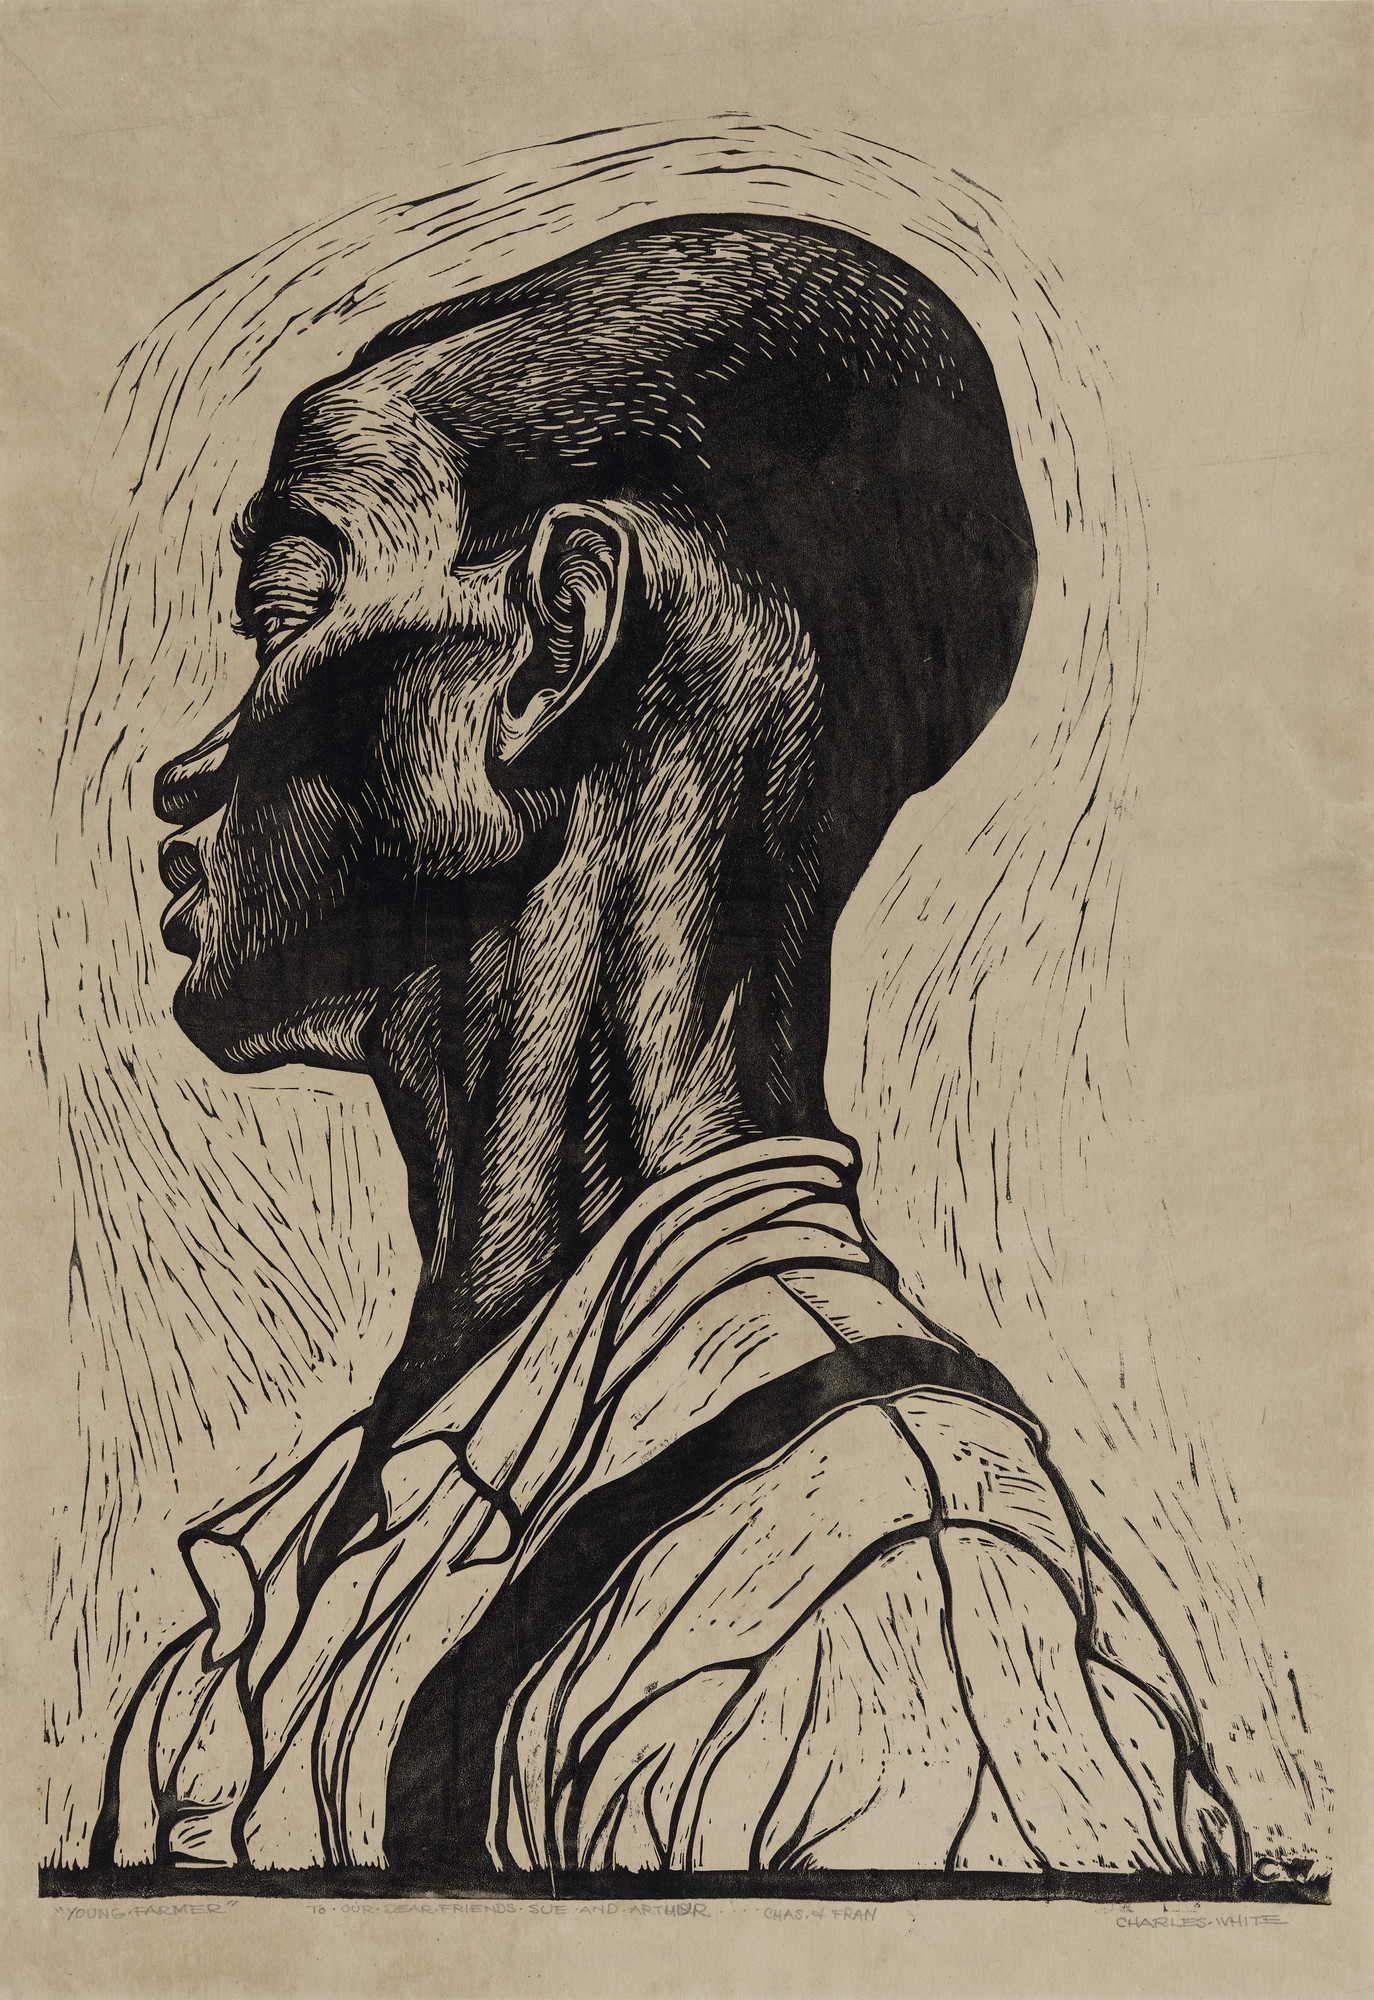 Charles White. _Young Farmer_. 1953. Linoleum cut. 28 3/4 x 19 13/16" (73 x 50.4 cm). Museum of Fine Arts, Boston. Lee M. Friedman Fund and The Heritage Fund for a Diverse Collection. © The Charles White Archives/ Photo © 2018 Museum of Fine Arts, Boston
